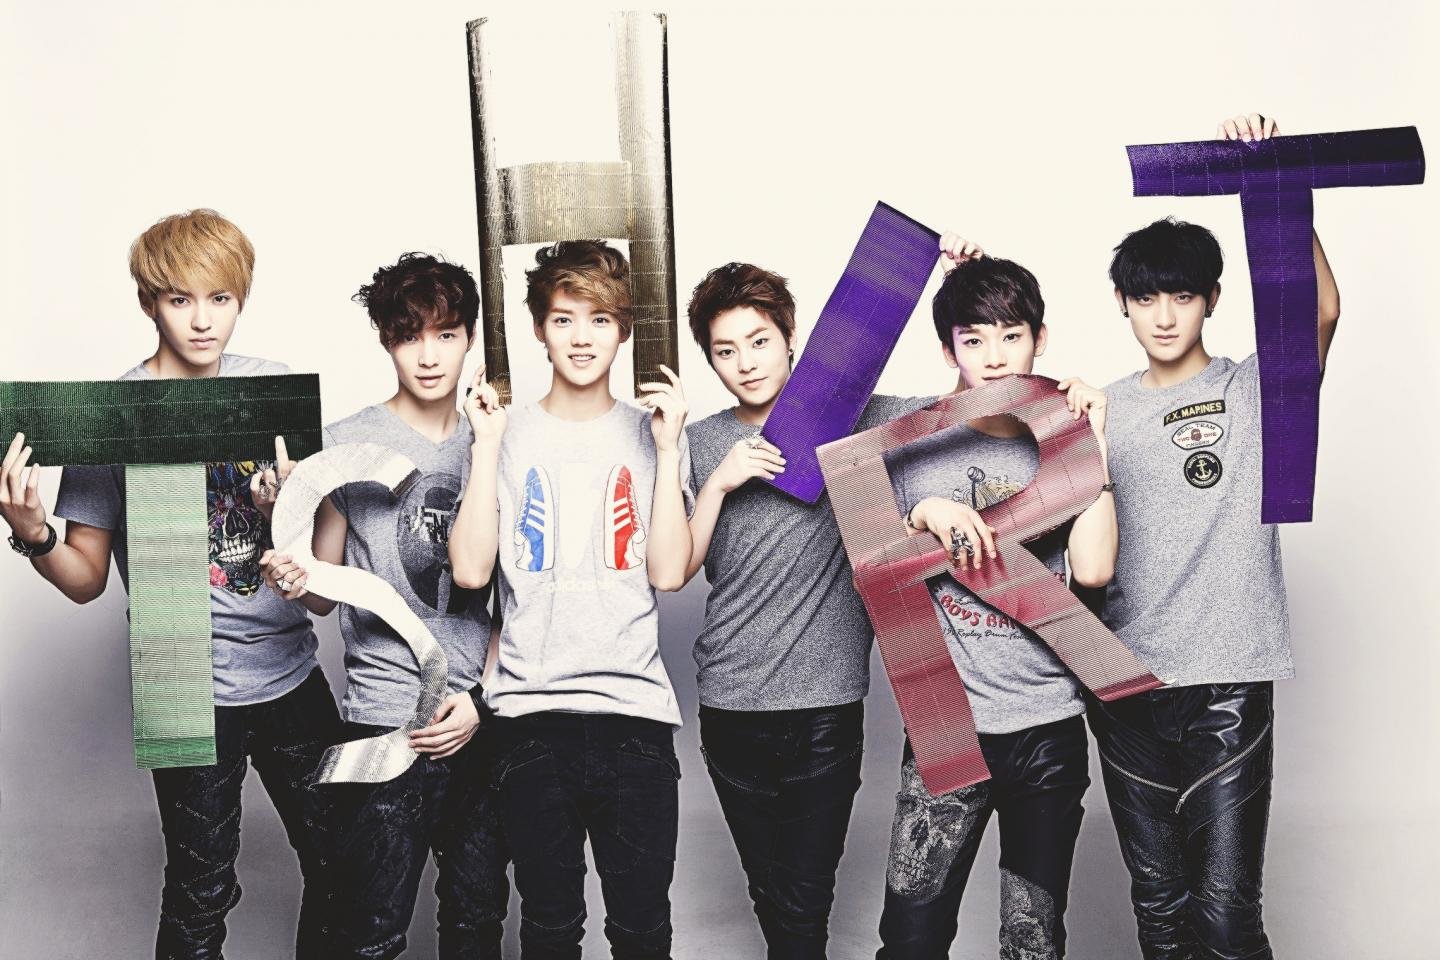  Exo  wallpapers  HD  for desktop  backgrounds 